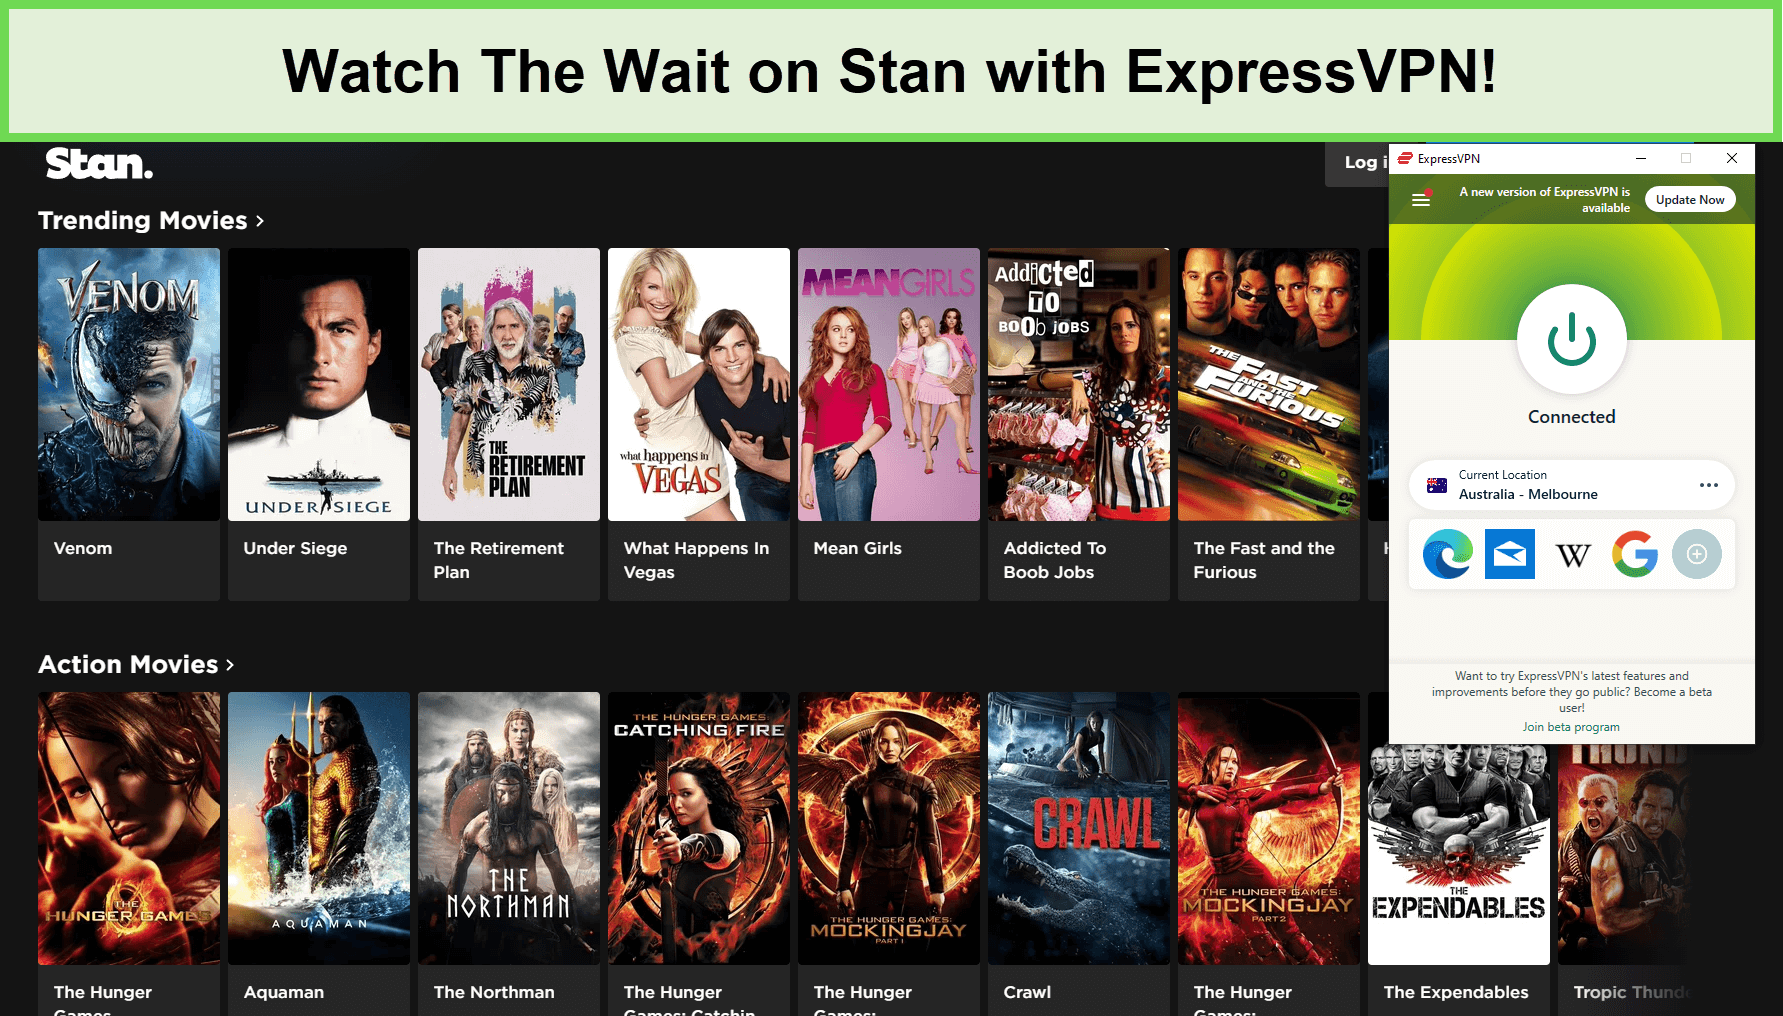 Watch-The-Wait-in-UK-on-Stan-with-ExpressVPN